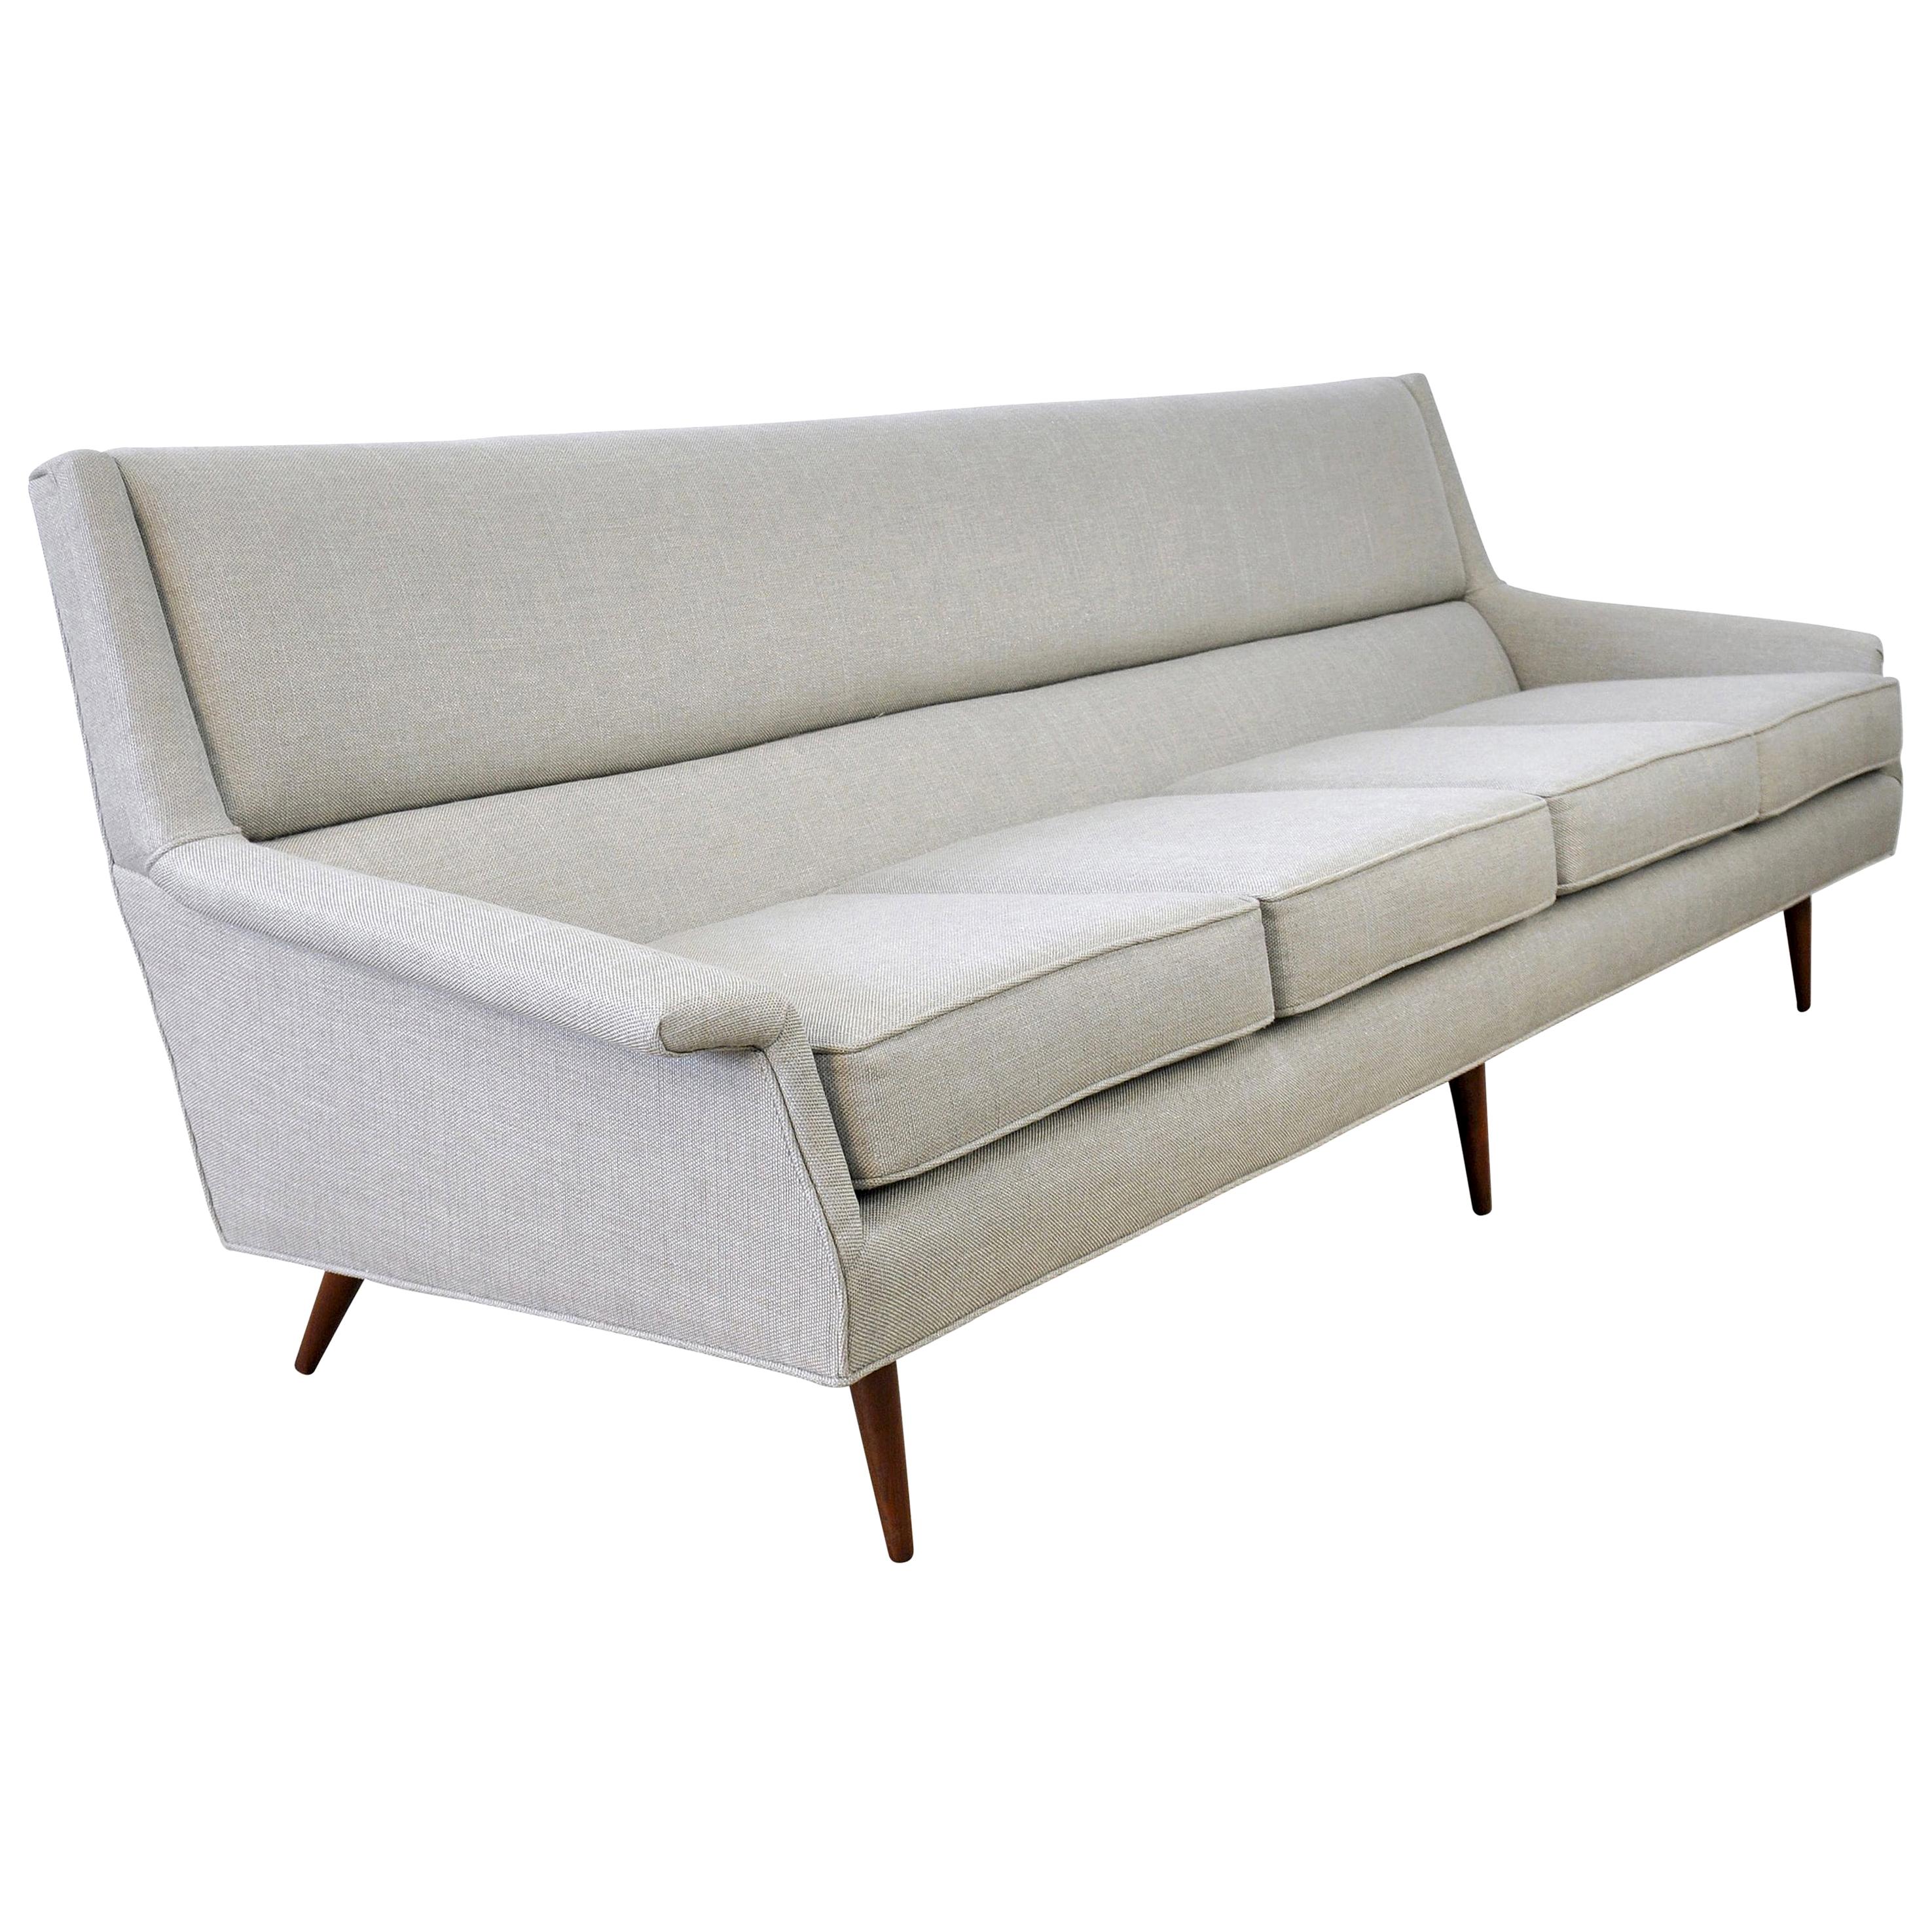 A sleek Mid-Century Modern light grey couch with walnut tapered legs, newly reupholstered in an overcast gray fabric with silver and beige undertones. The vintage four-seat sofa, dating from the 1950s, was designed by Milo Baughman for Thayer Coggin